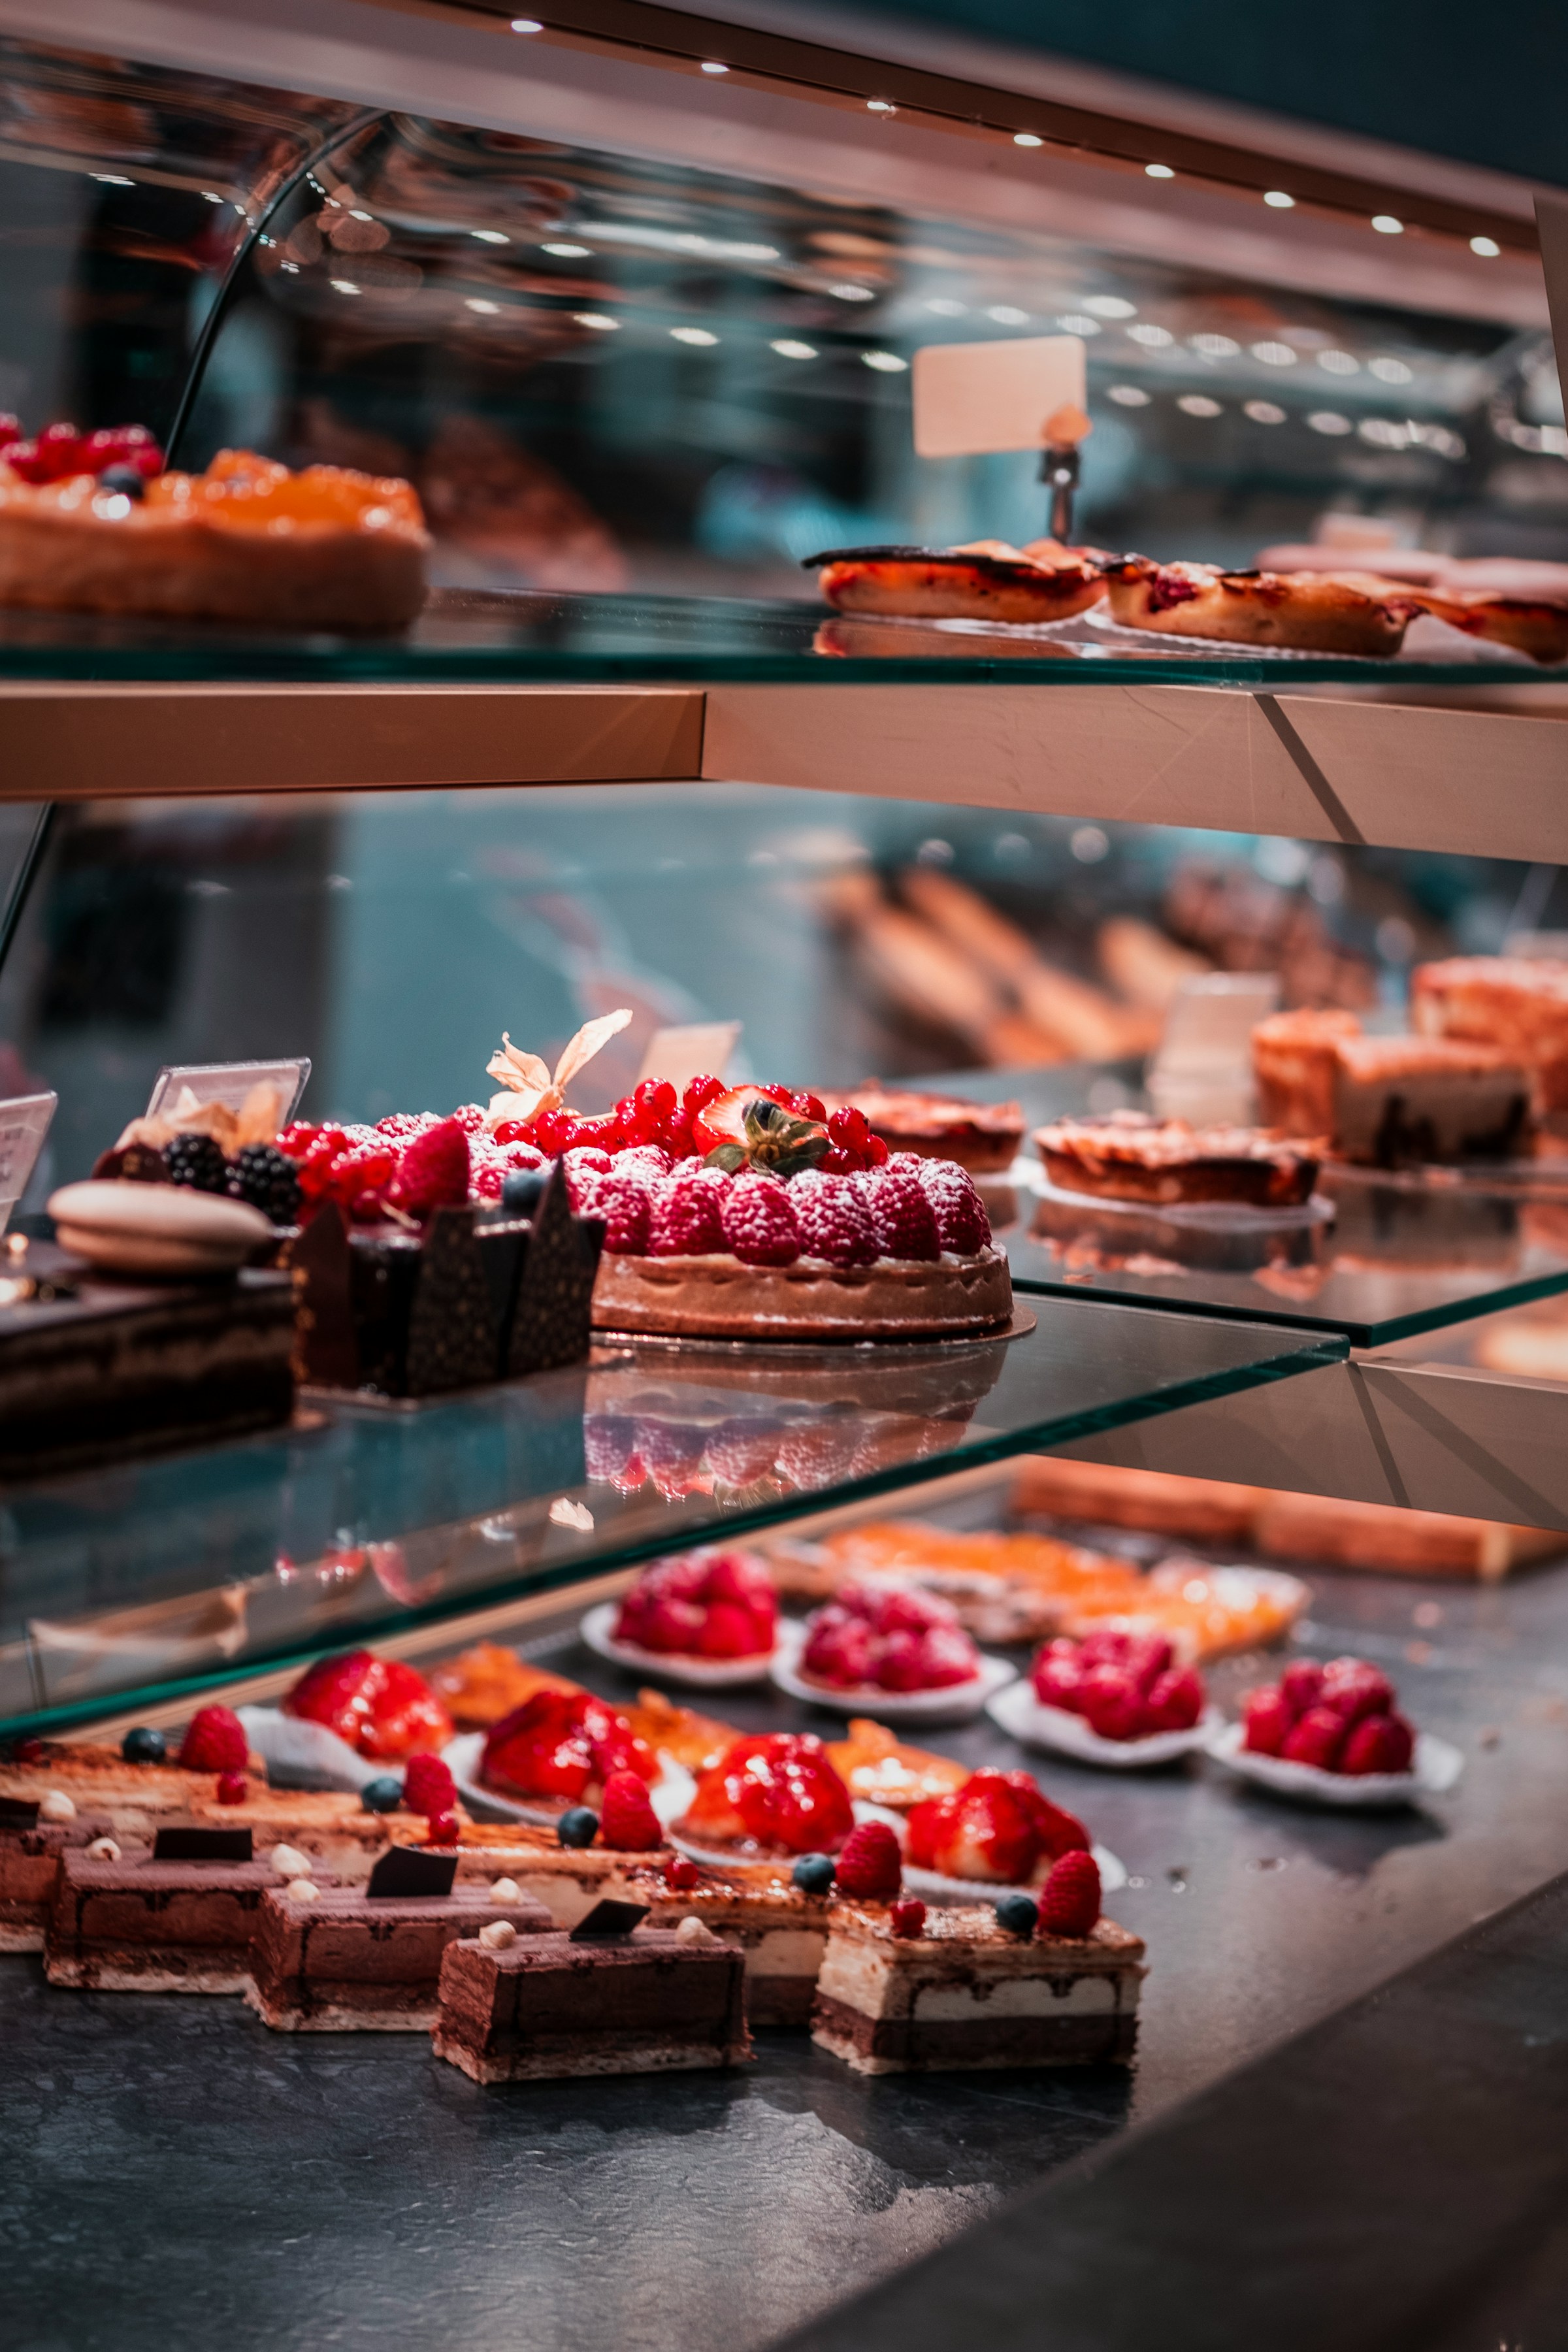 A display counter at a bakery | Source: Unsplash